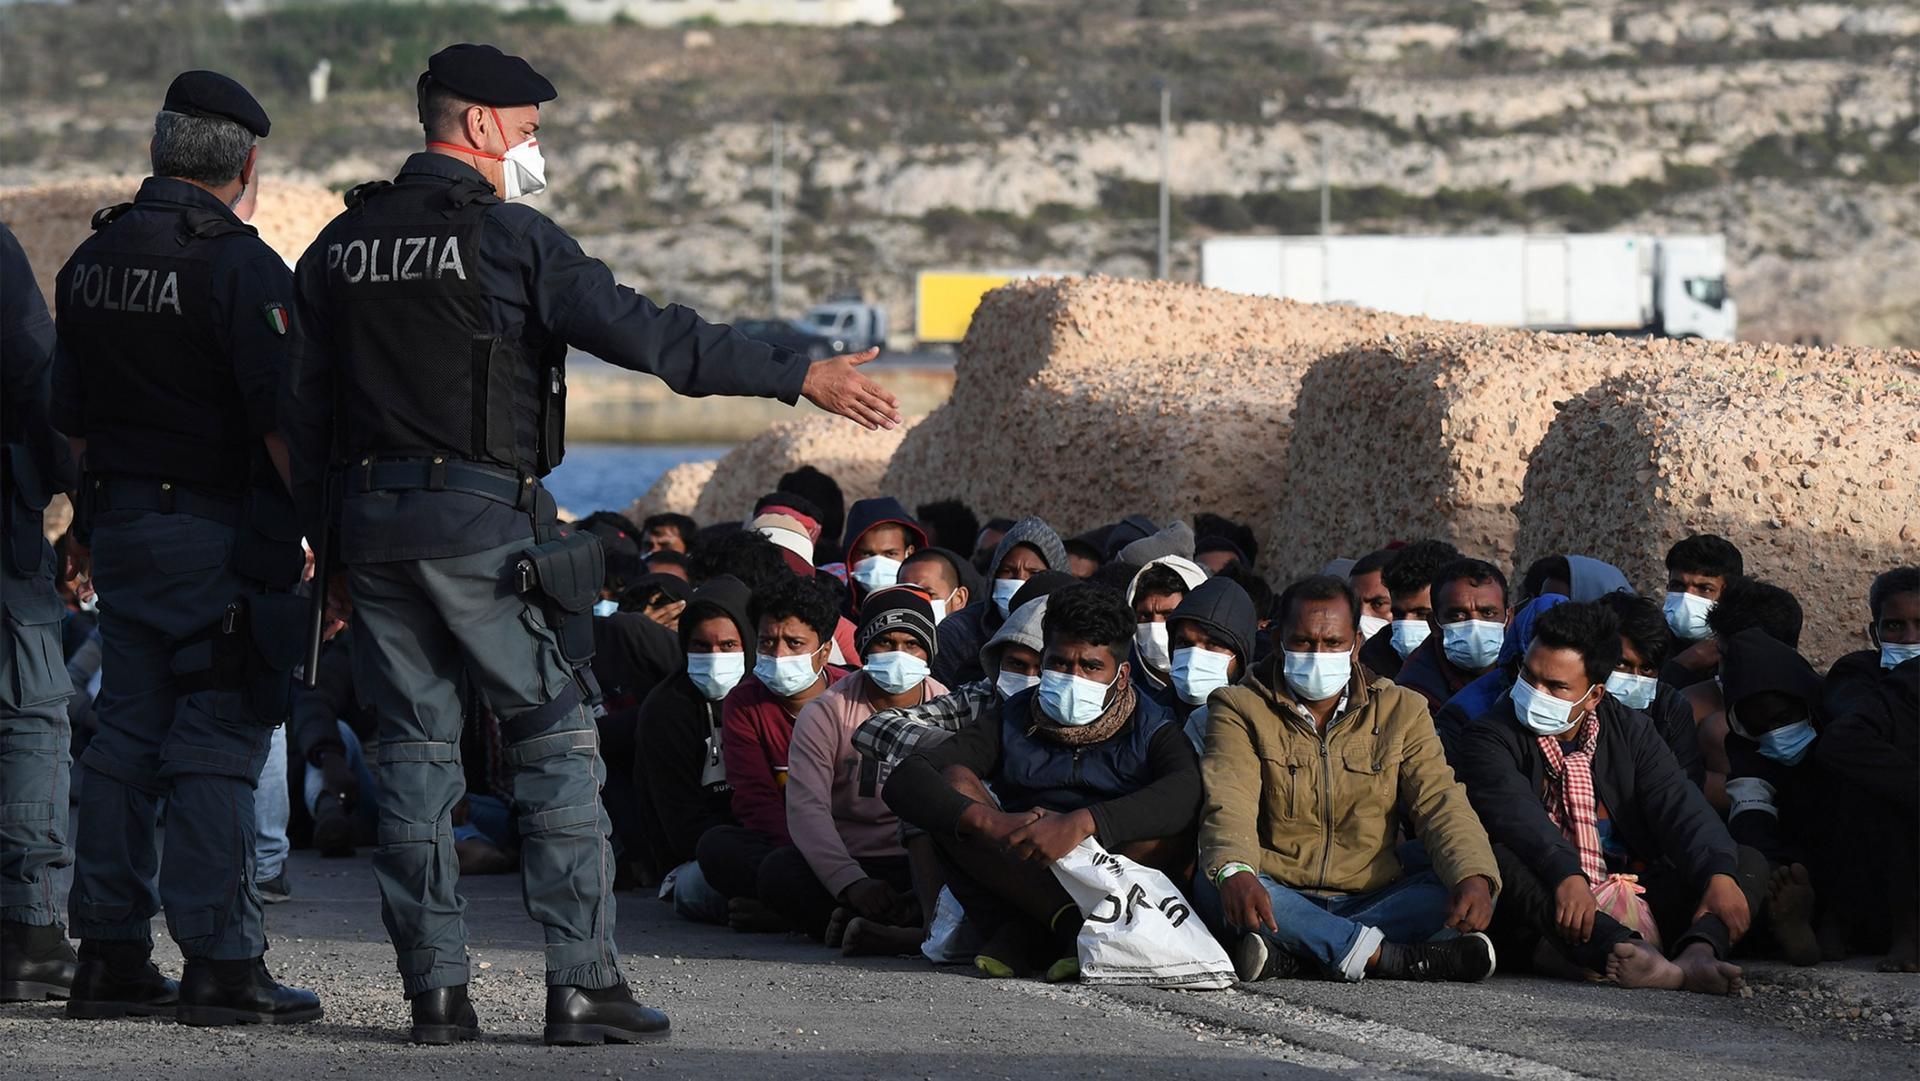 Migrants wearing face masks to curb the spread of COVID-19 sit at a pier as Italian police officers stand by.